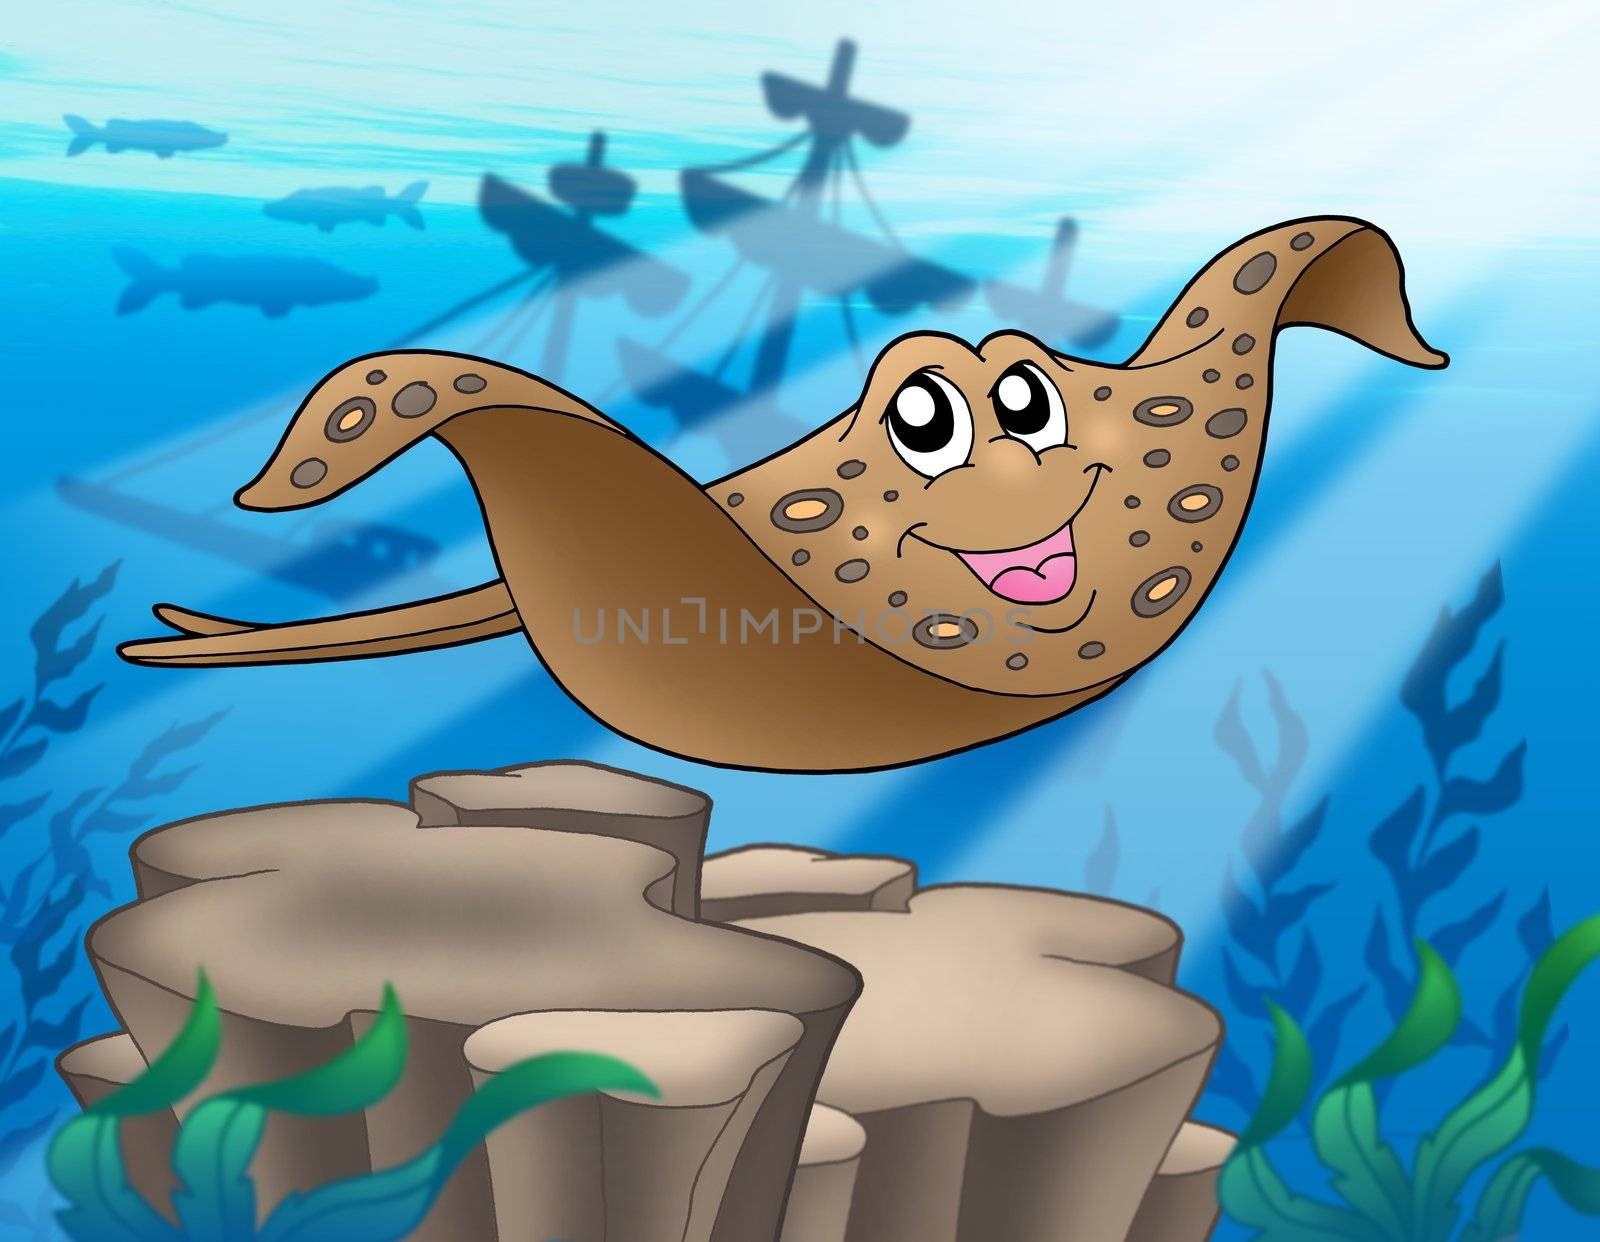 Eagle ray with shipwreck - color illustration.